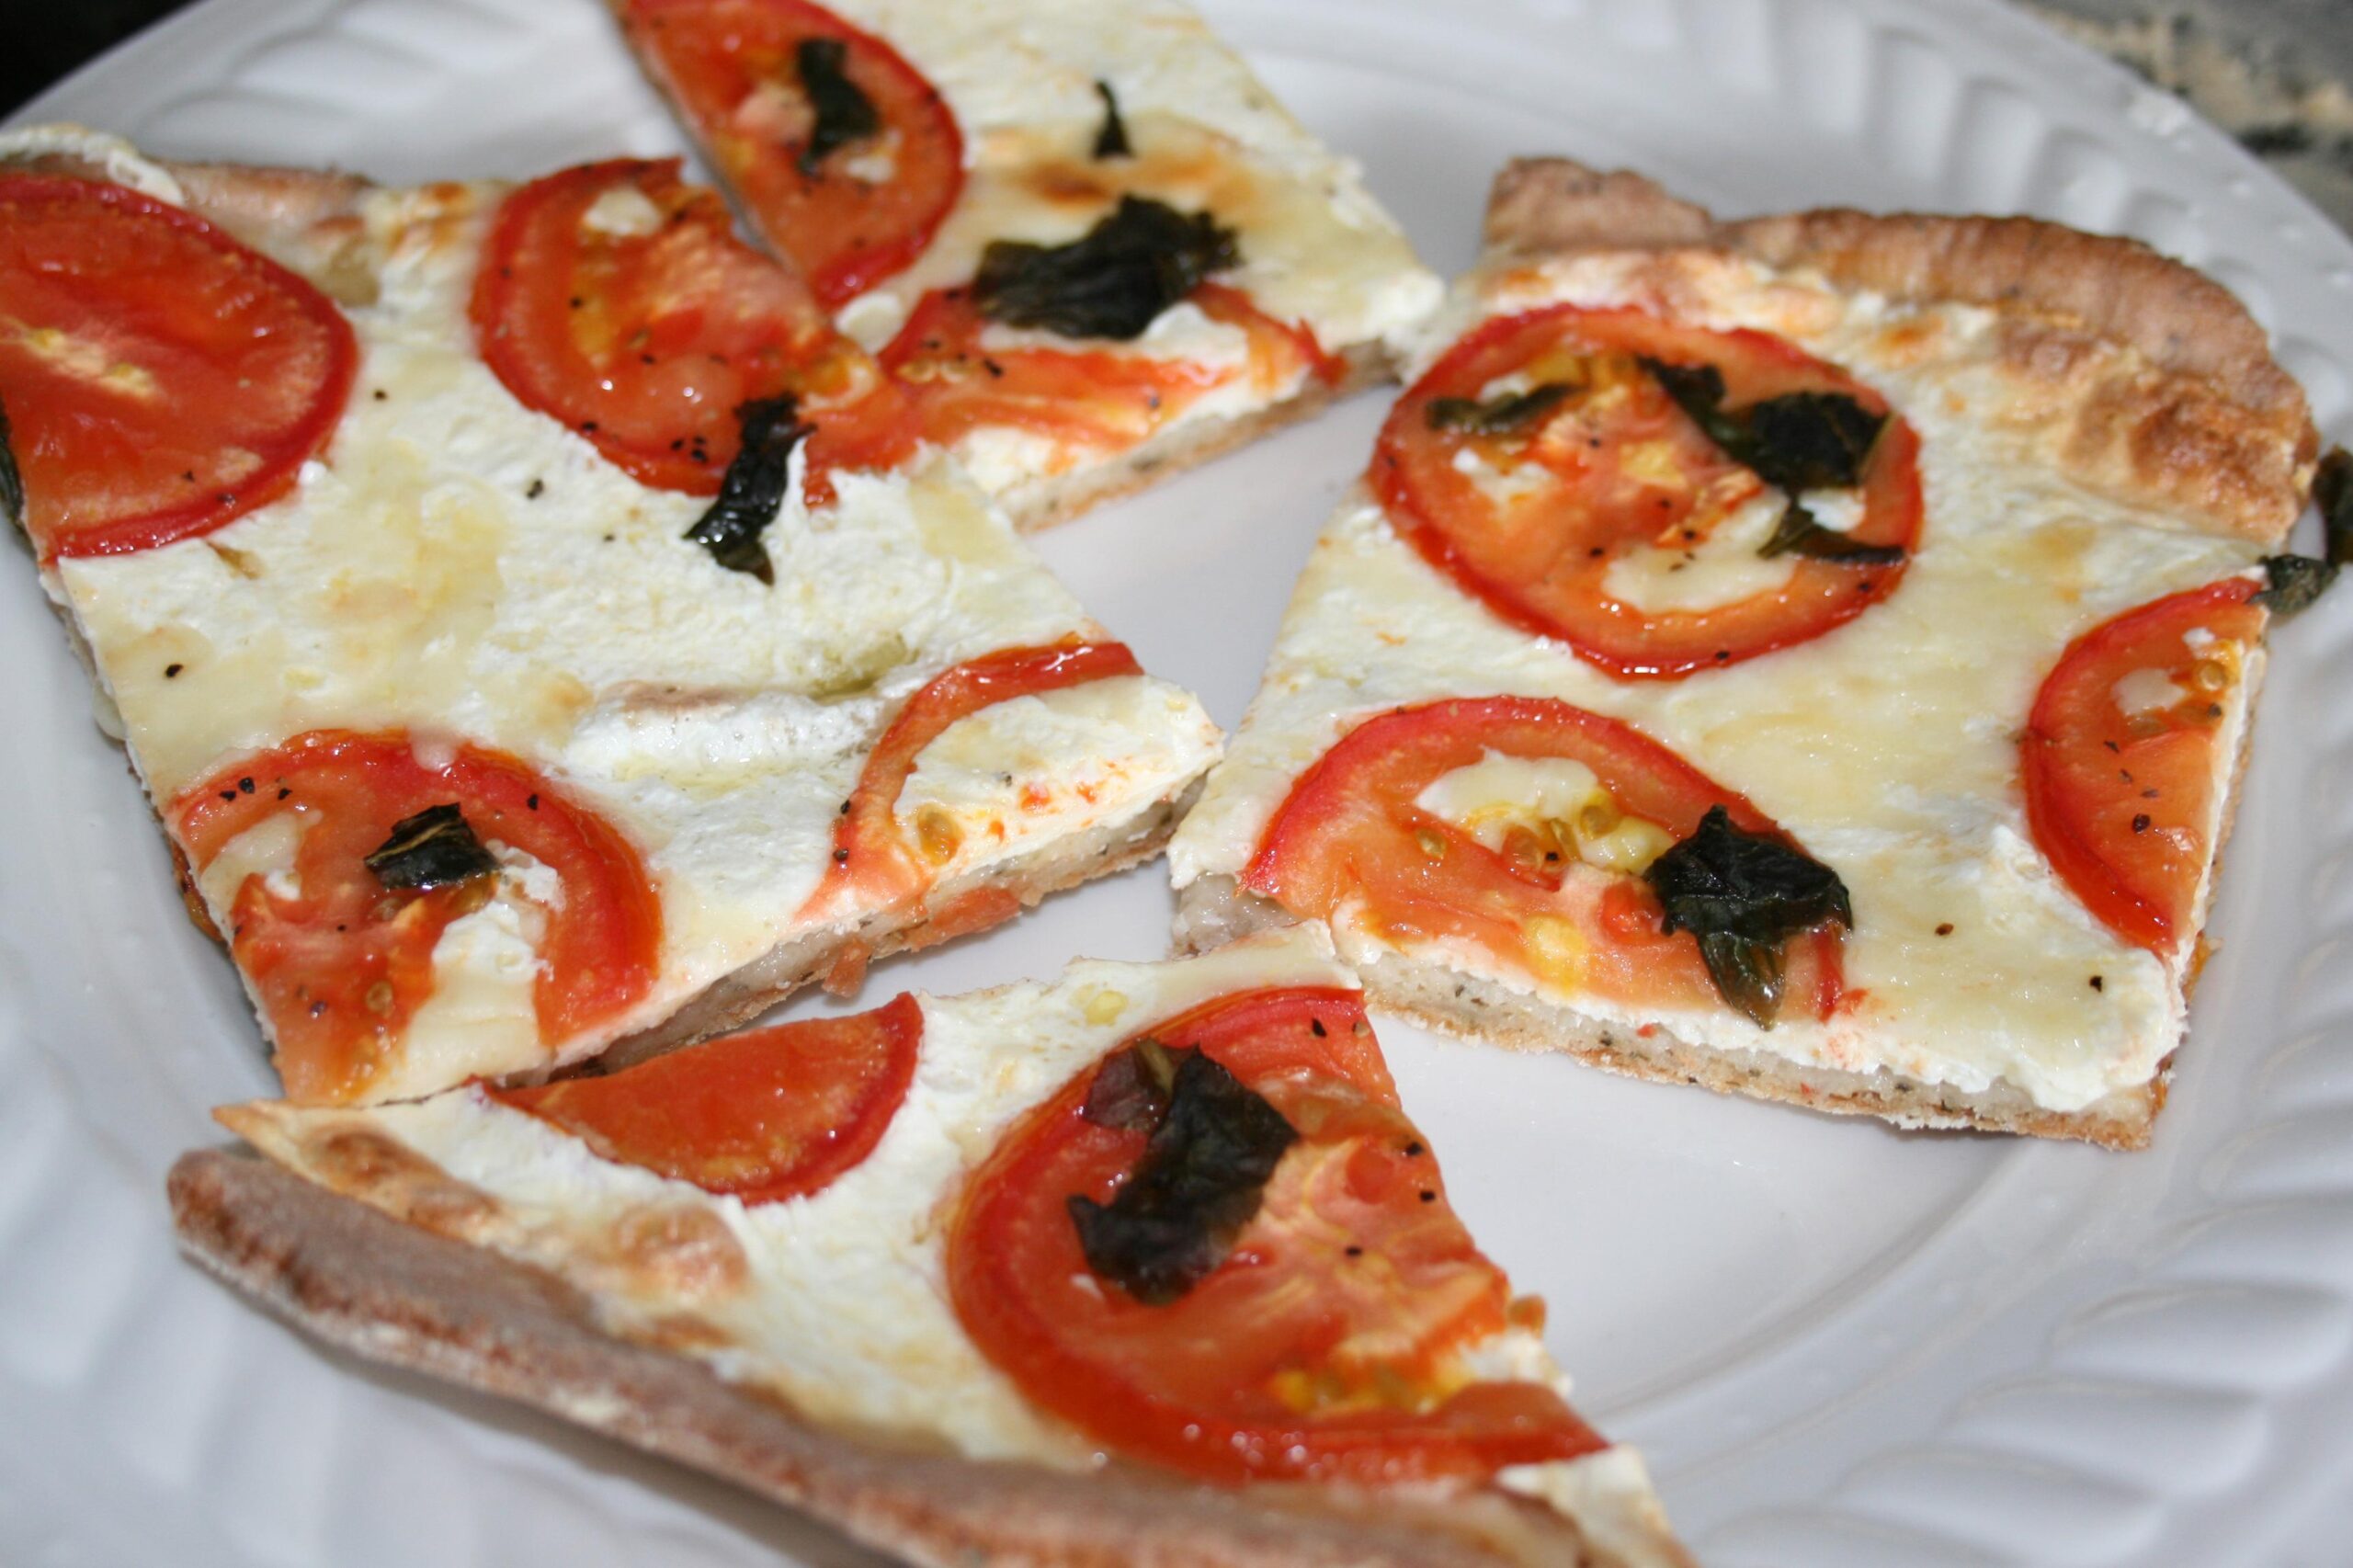  Feast your eyes on this delicious and gluten-free Margherita pizza!